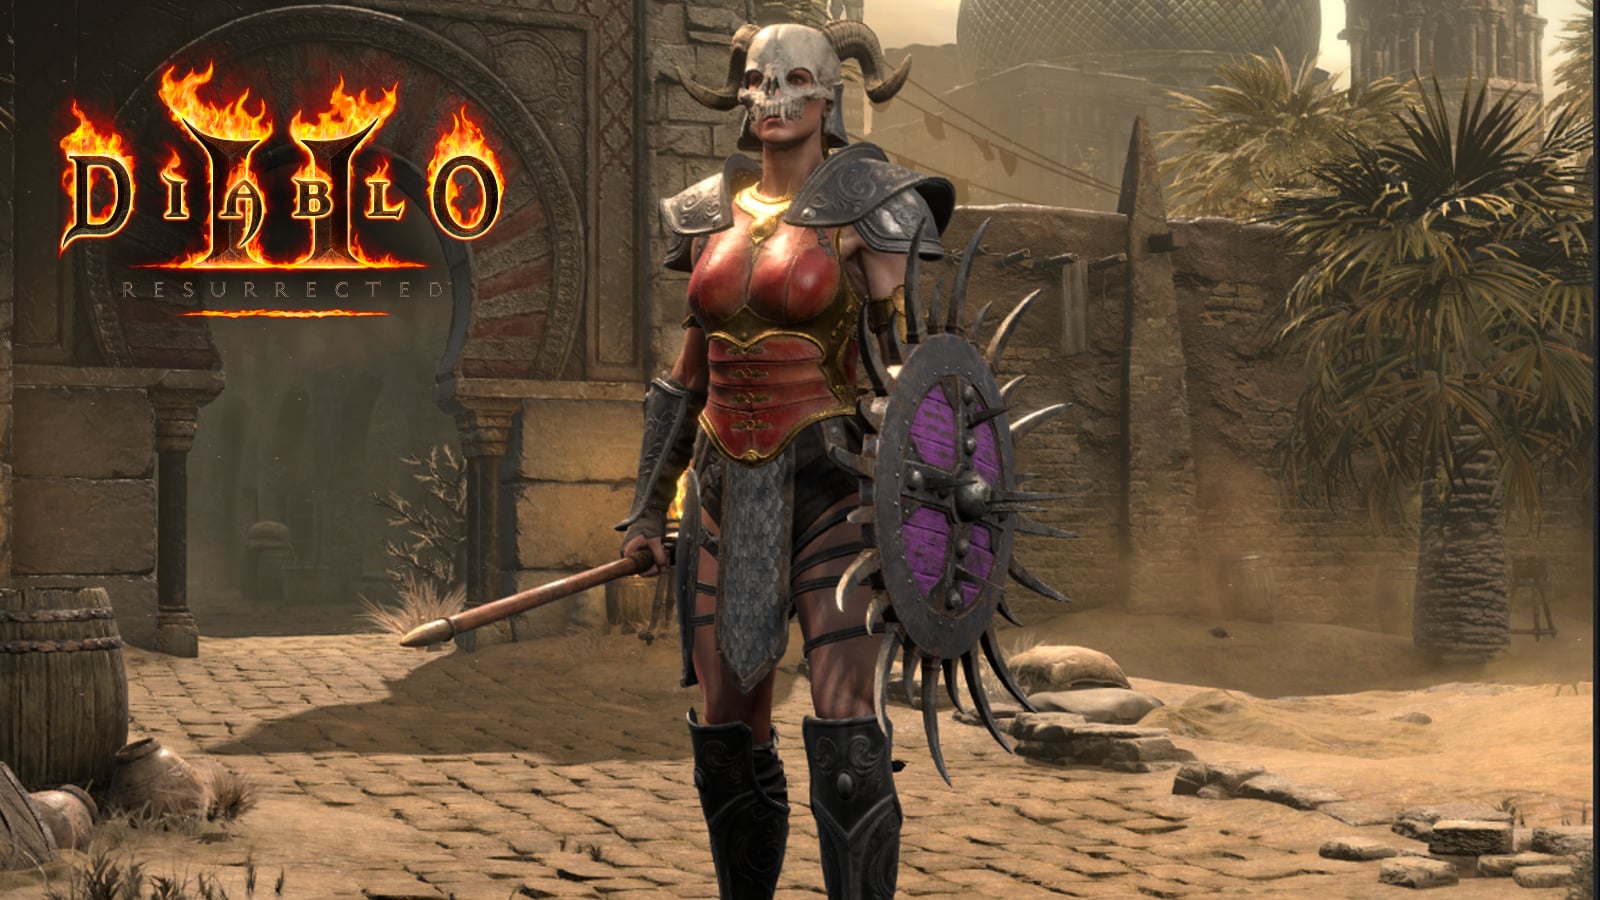 He's the most powerful of all the playable Diablo 2 classes, Online Event